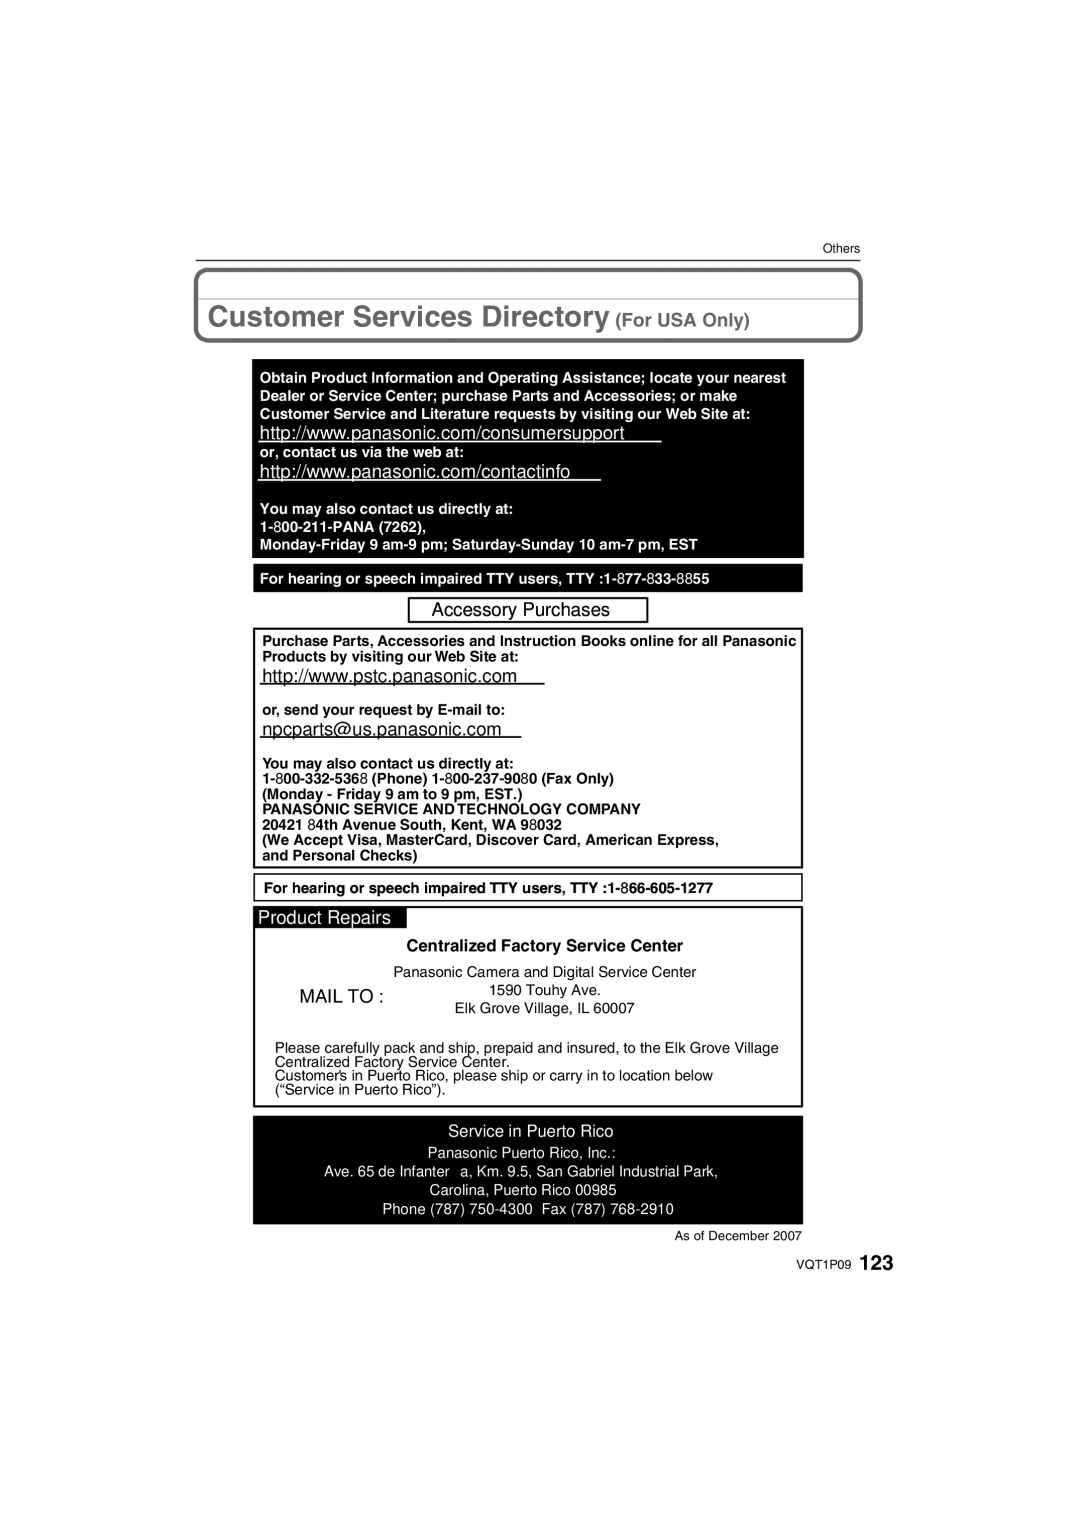 Panasonic DMC-FX35 operating instructions Customer Services Directory For USA Only, Centralized Factory Service Center 